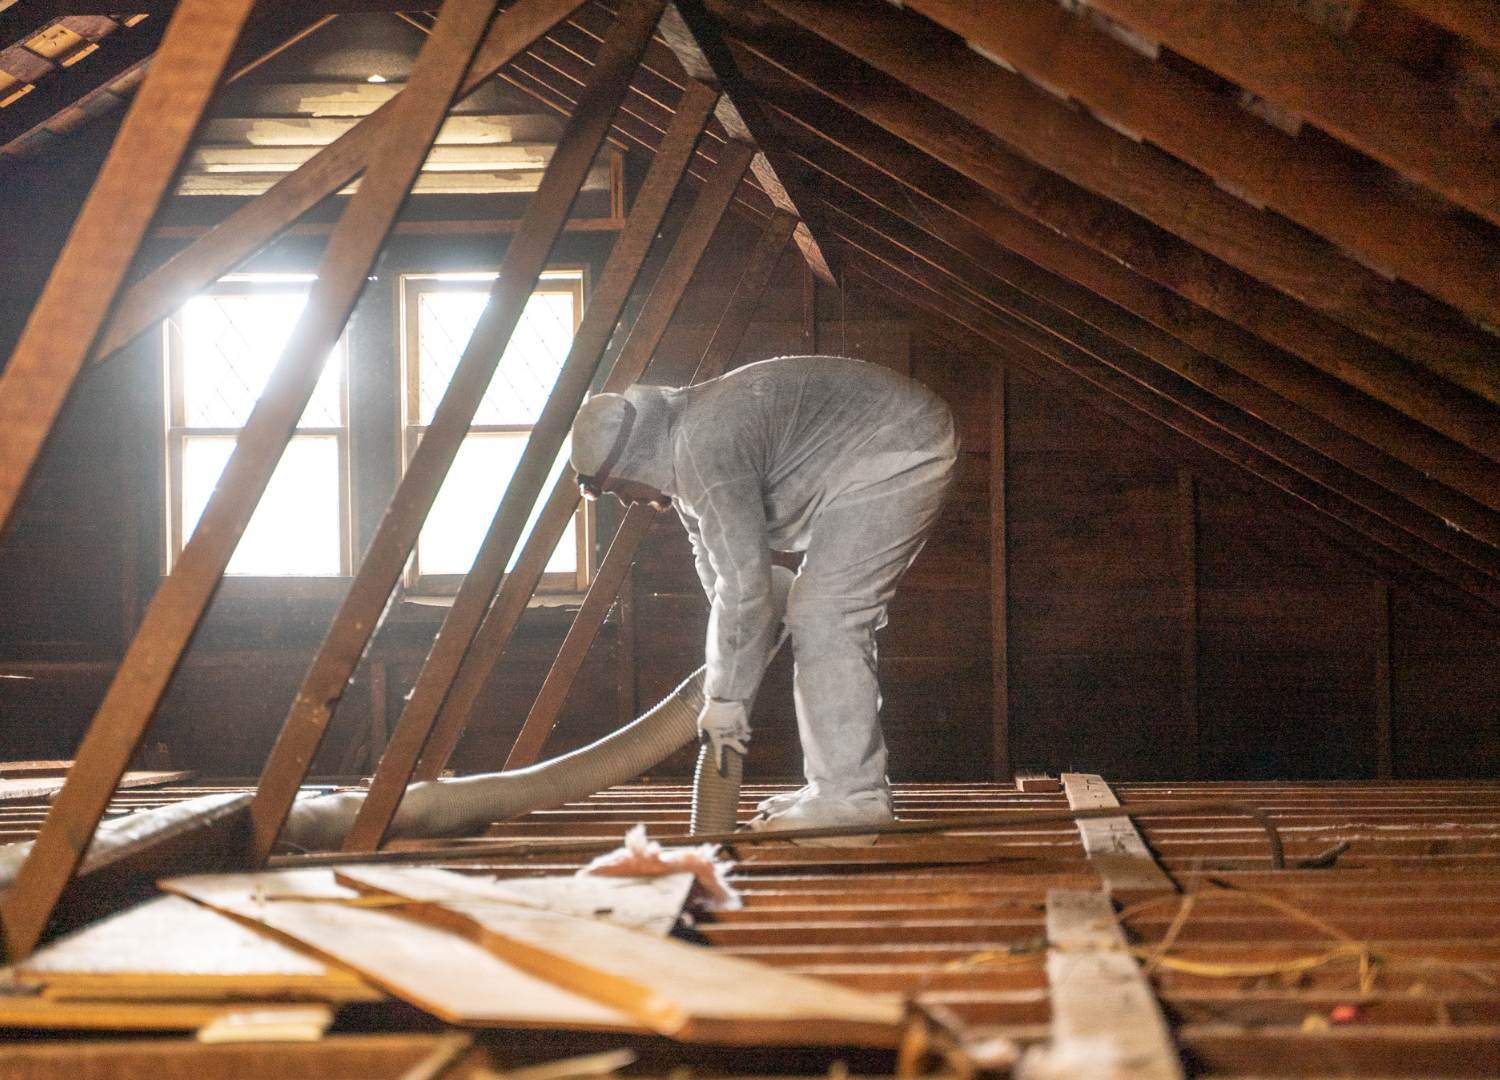 mean in a white hazard suit and face mask repairing air ducts in an attic.